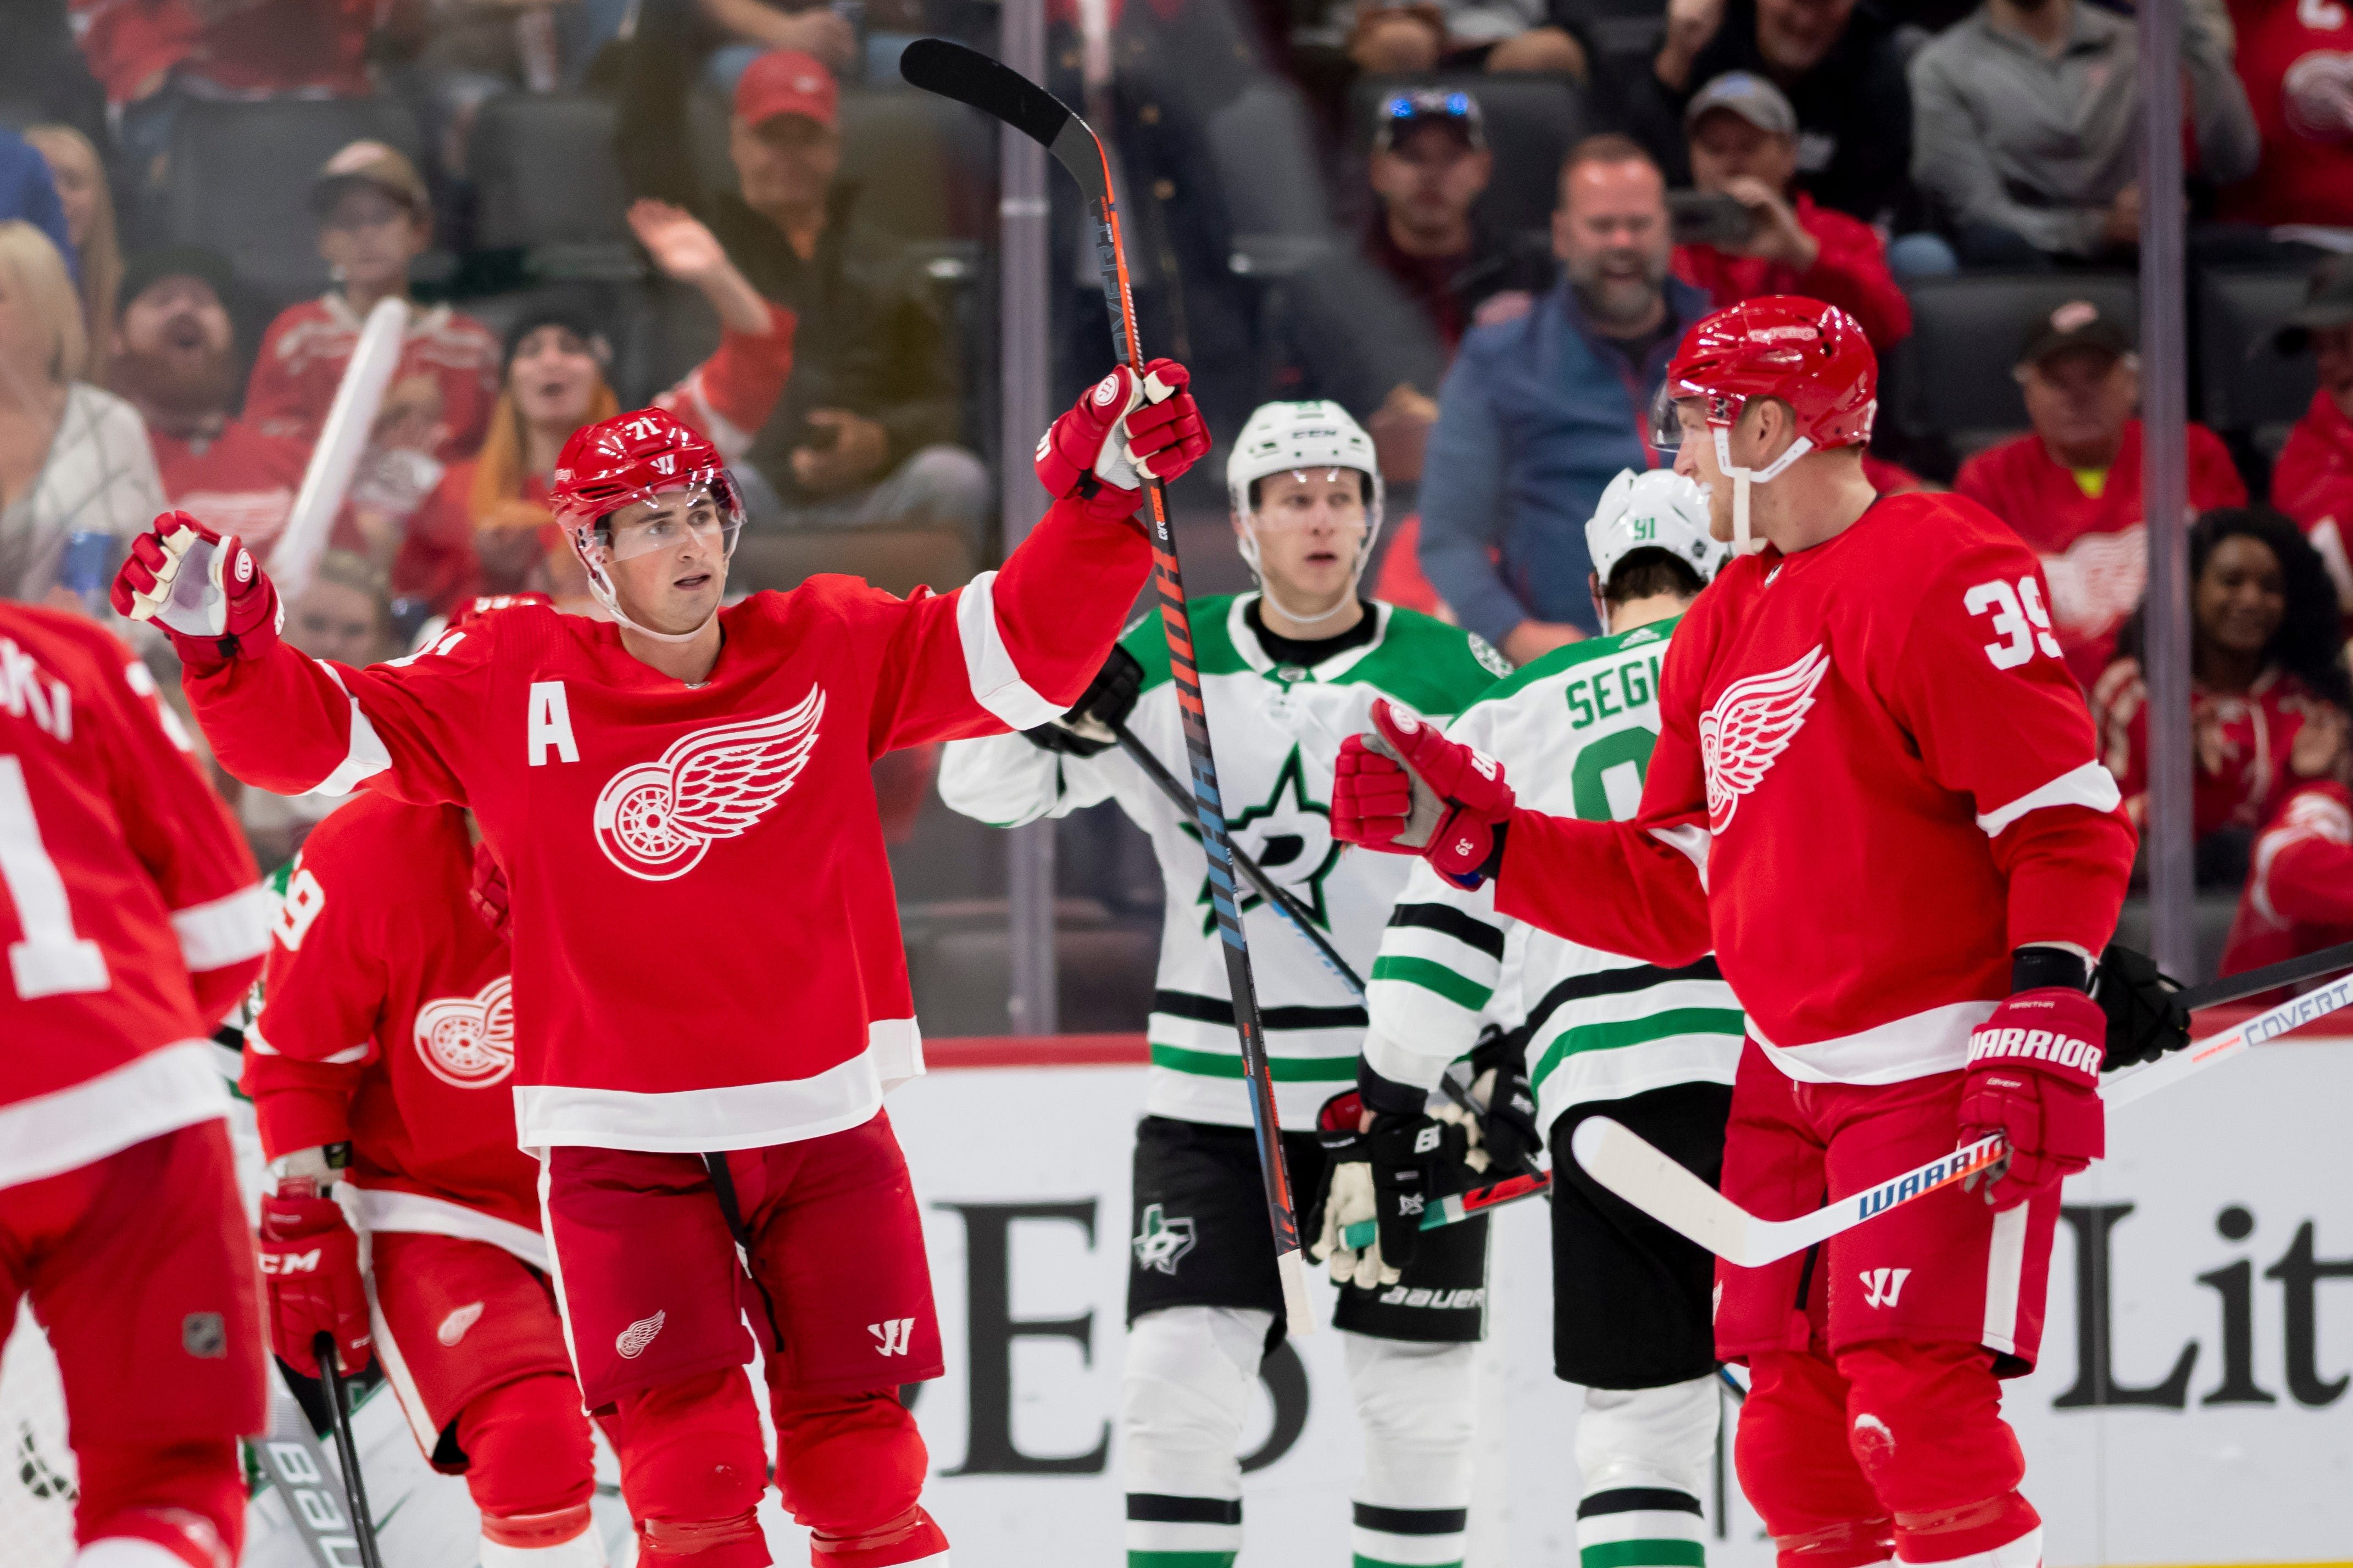 Detroit center Dylan Larkin, left, celebrates a goal by right wing Anthony Mantha in the second period.